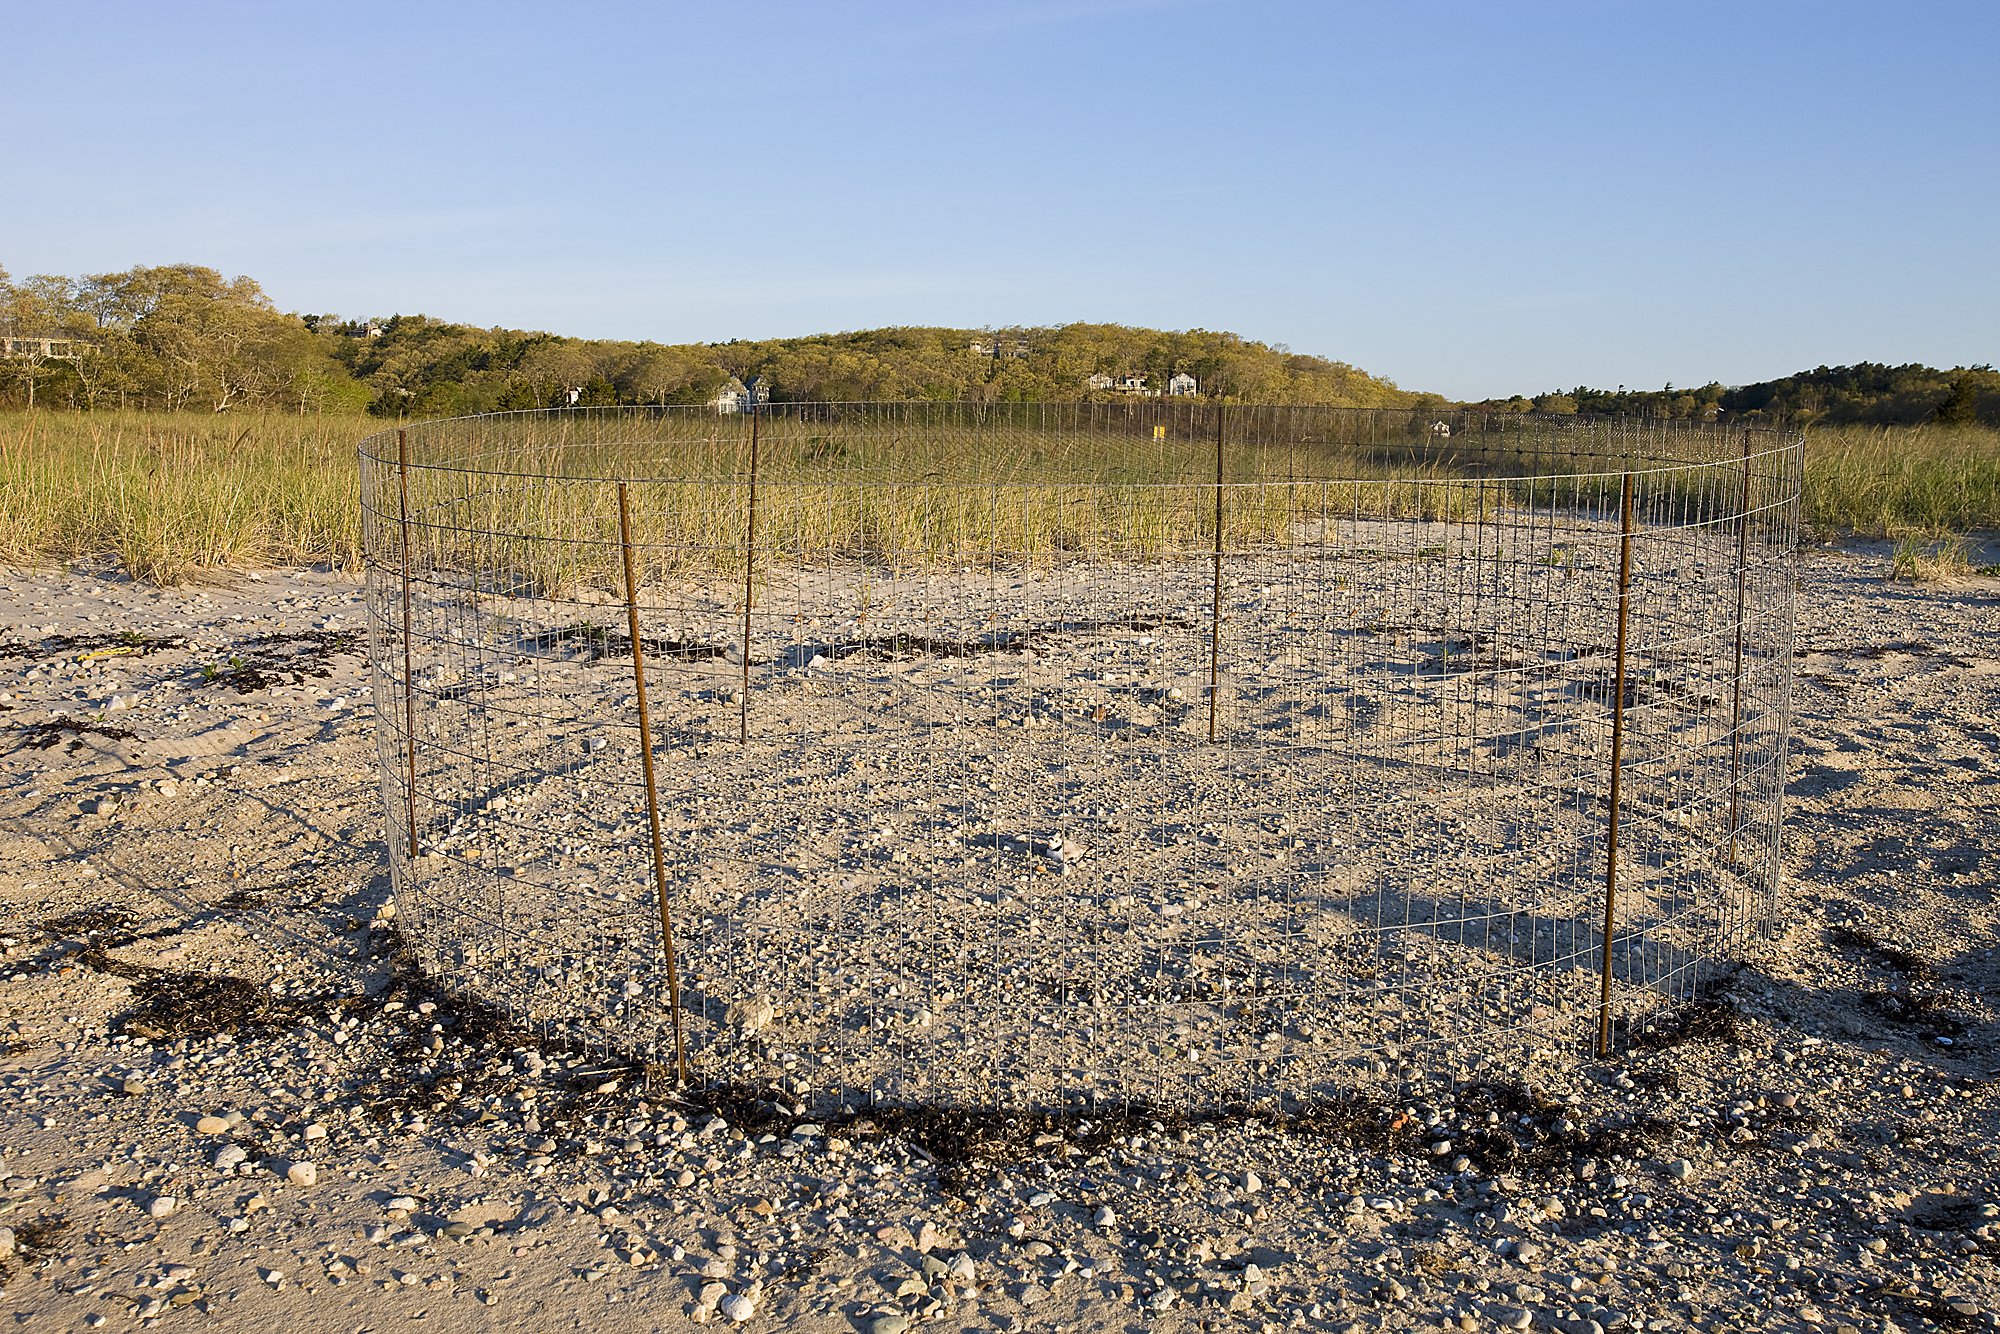  A piping plover nest exclosure at the Shifting Lots Preserve in Plymouth, Massachusetts.  Owned by the Wildlands Trust.  Cape Cod Bay.  Near Ellisville Harbor State Park. 